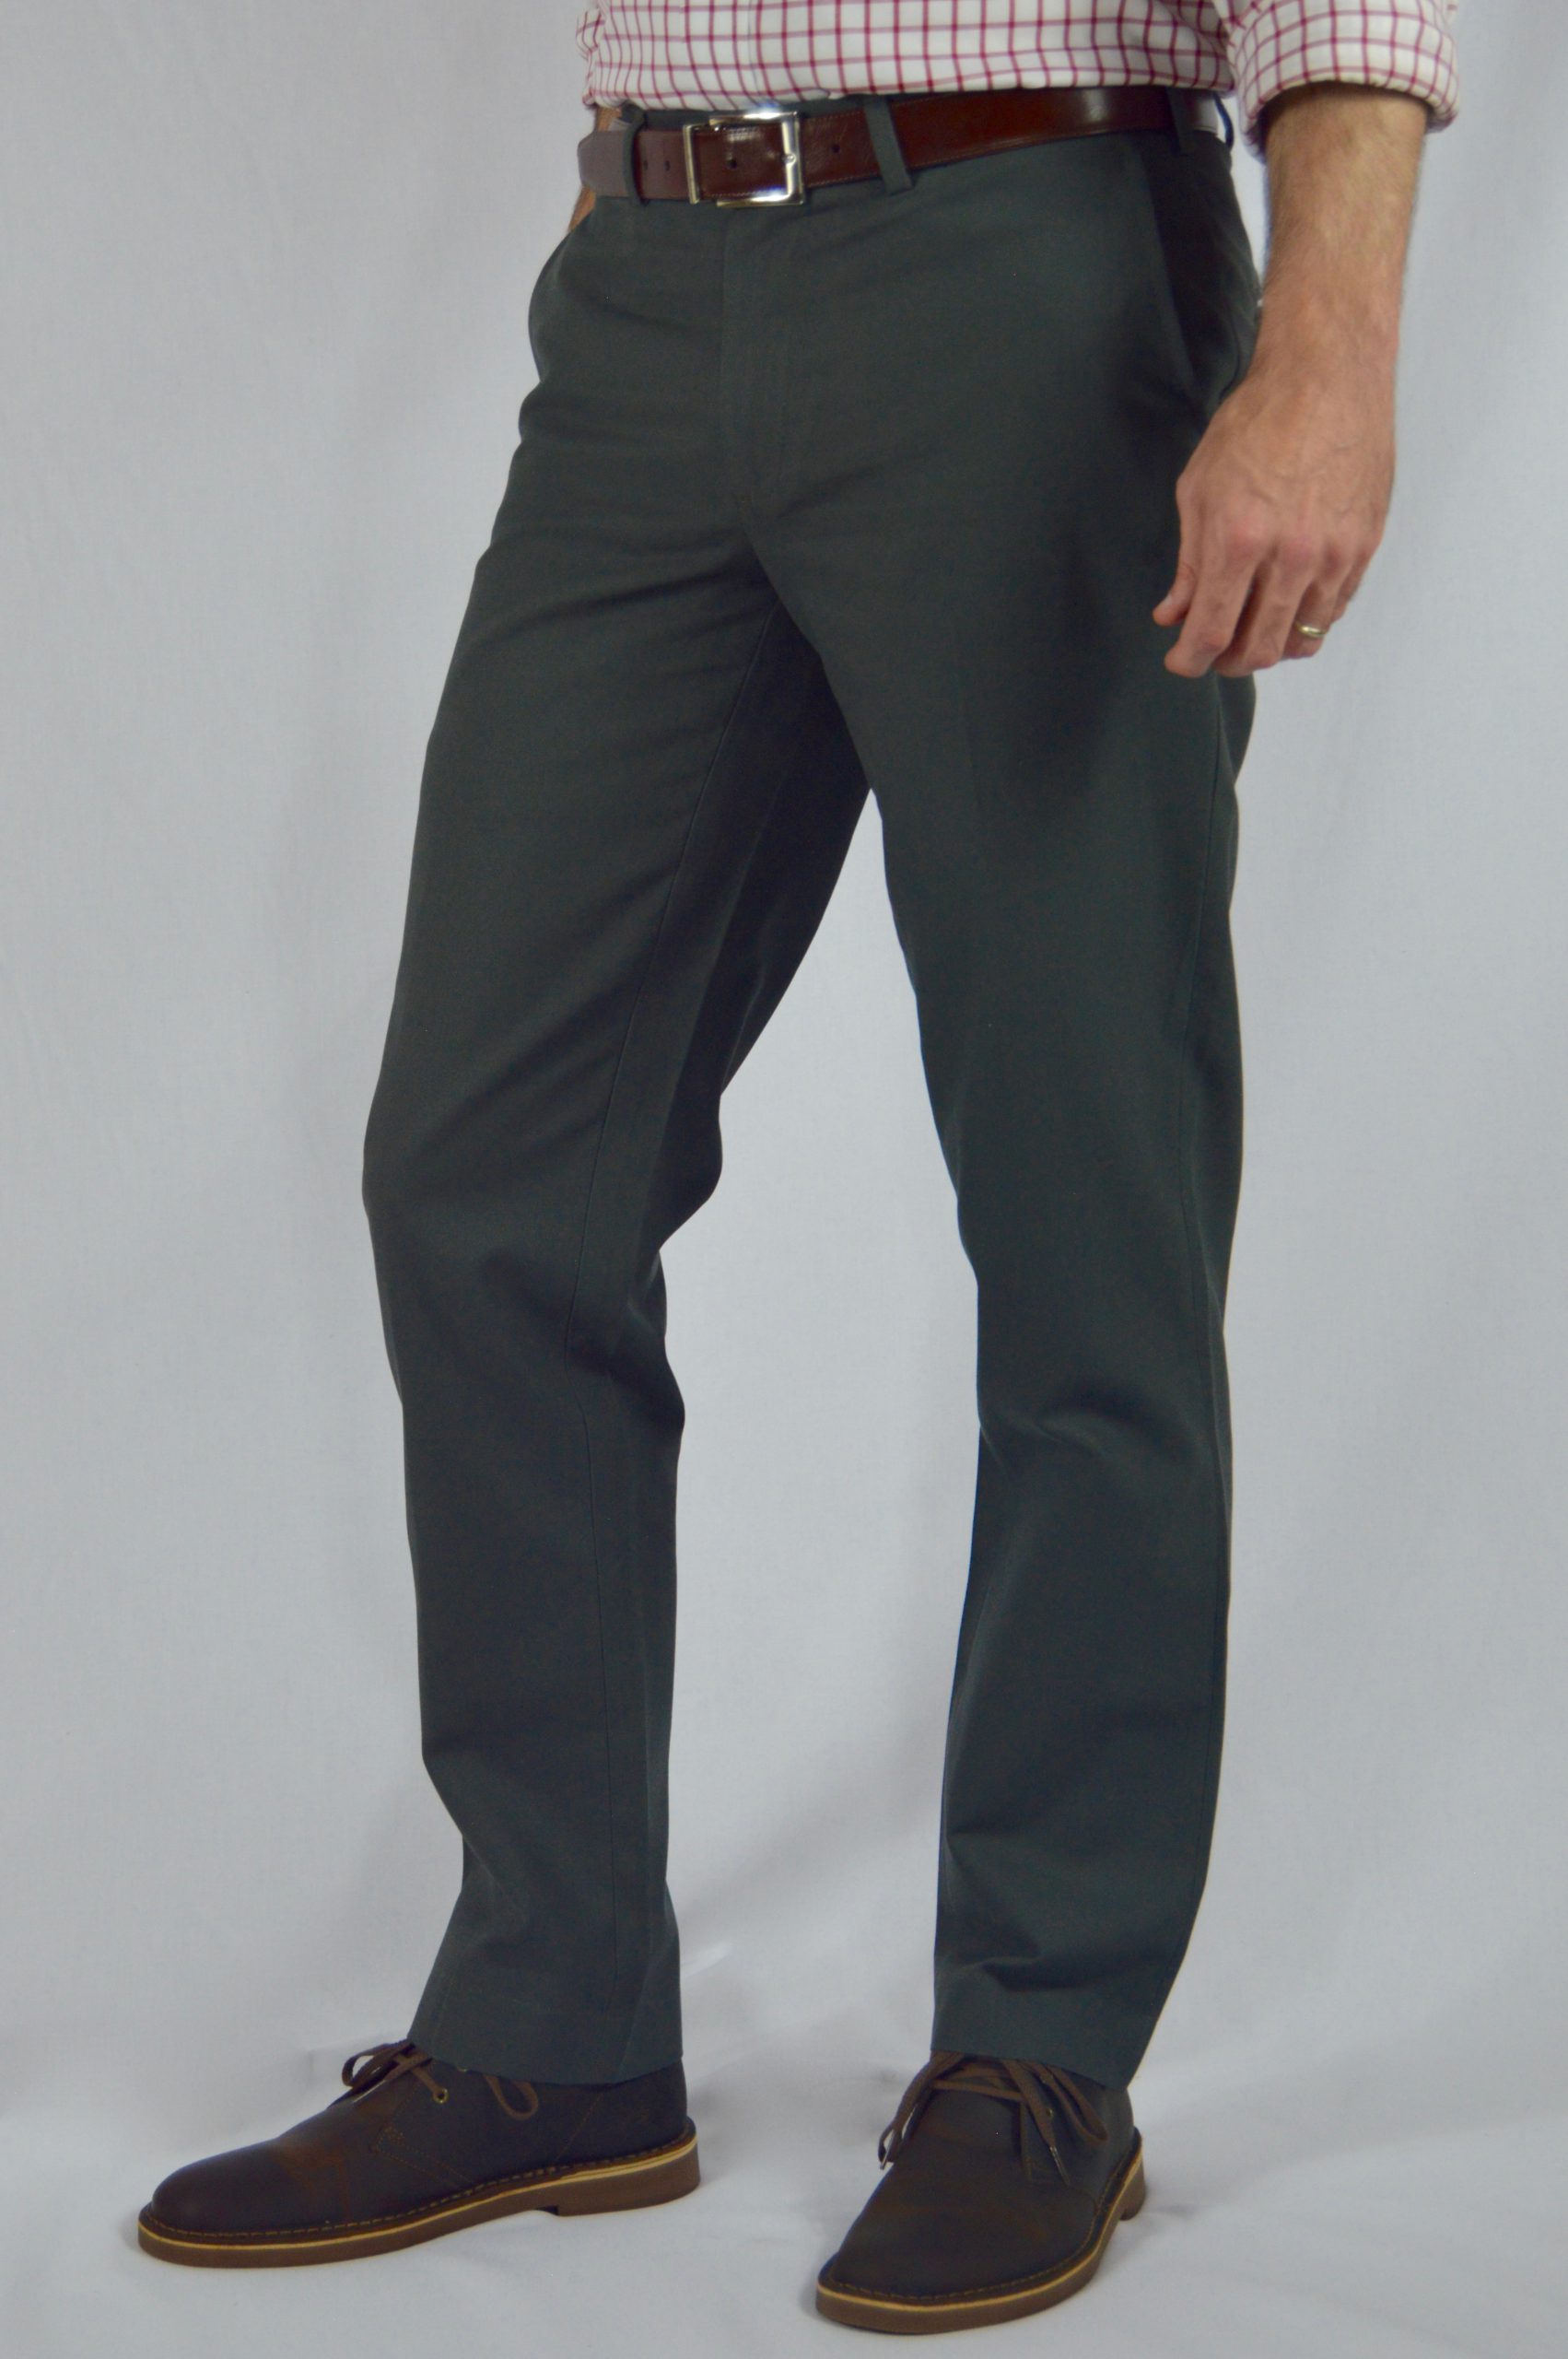 Made In USA Rogue Canvas Pants - All American Clothing Co